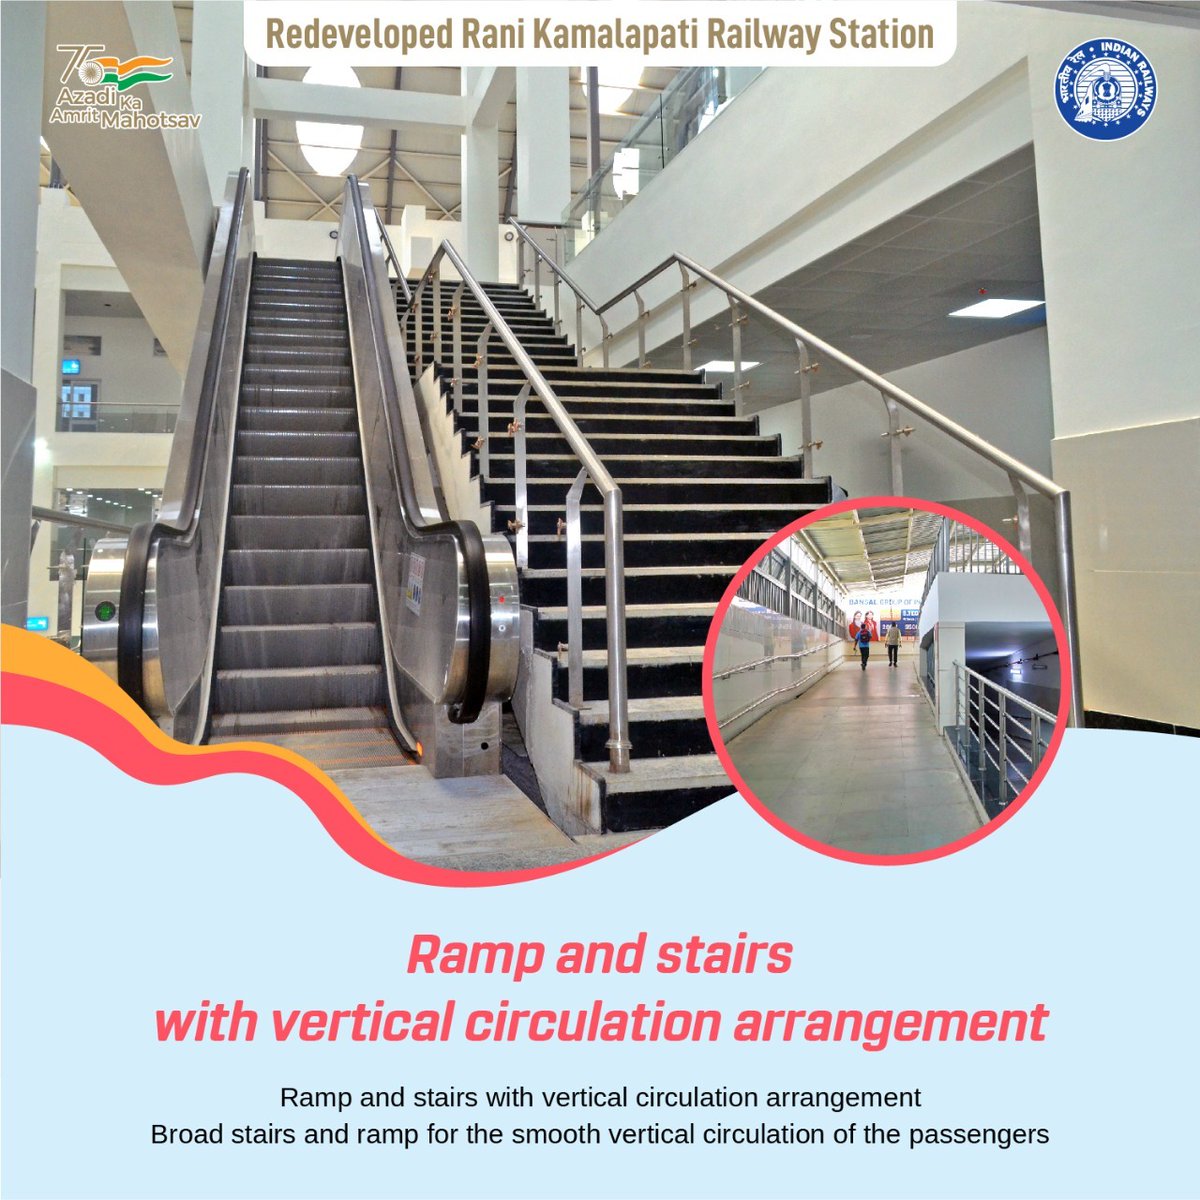 Ramp and stairs with vertical circulation arrangement is available at Rani Kamalapati Railway Station. Broad stairs and ramp will ensure smooth vertical circulation of passengers. #NayeBharatkaNayaStation